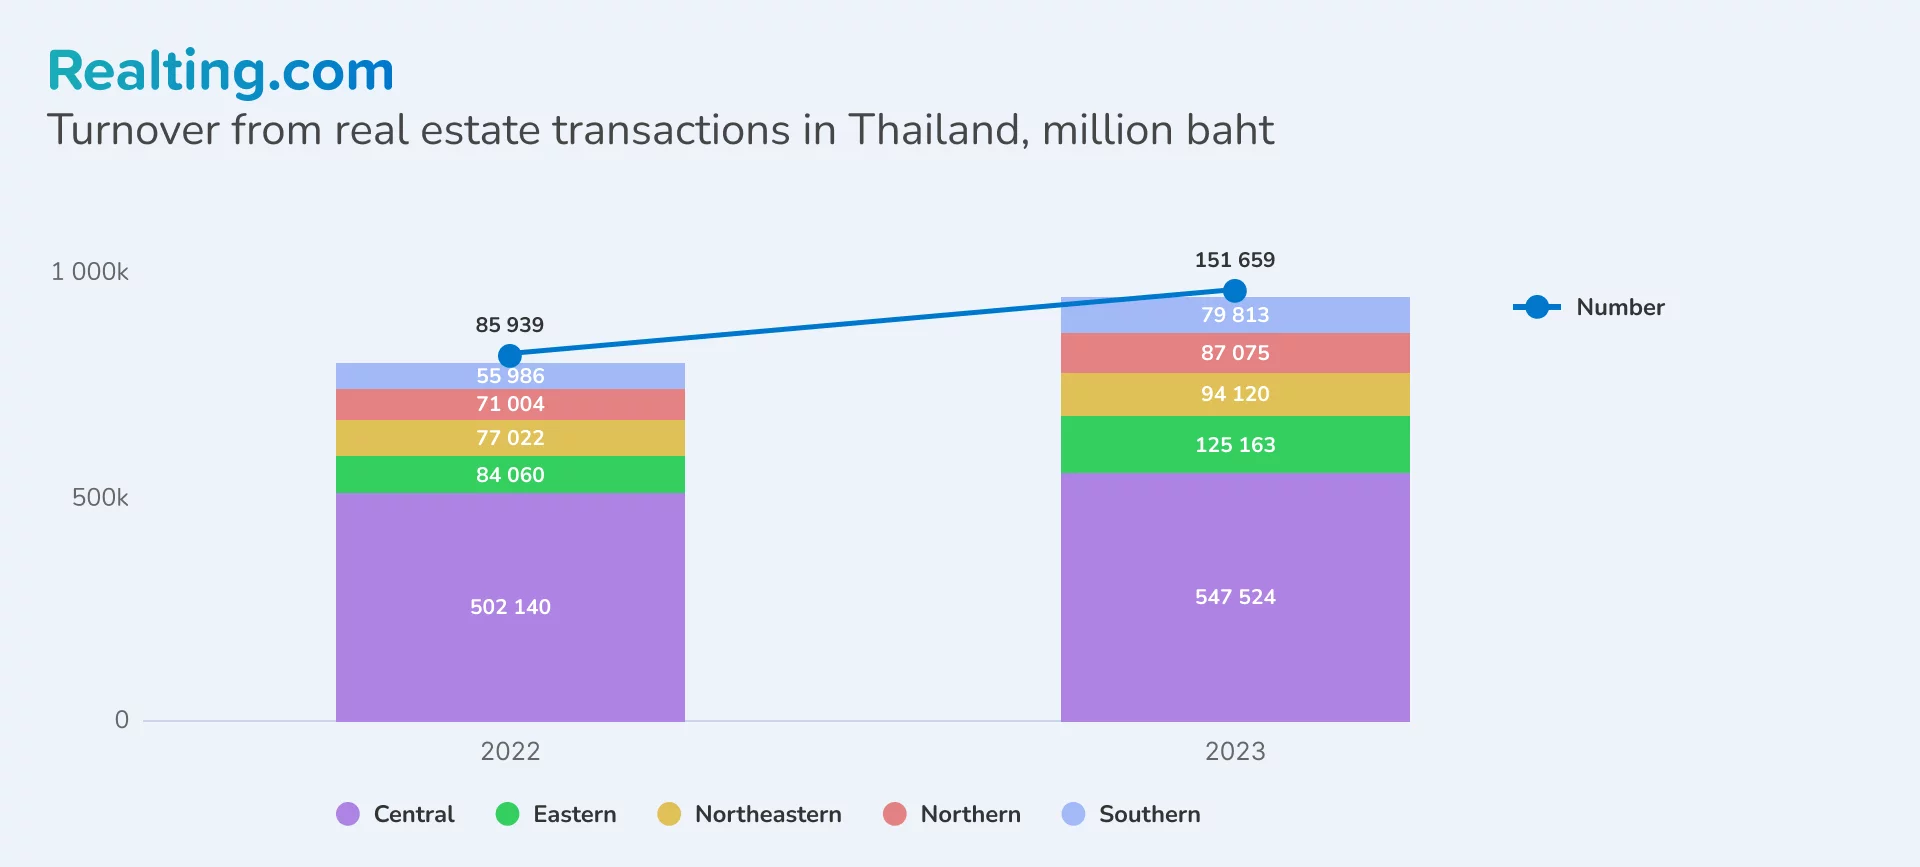 cash turnover from real estate transactions in Thailand